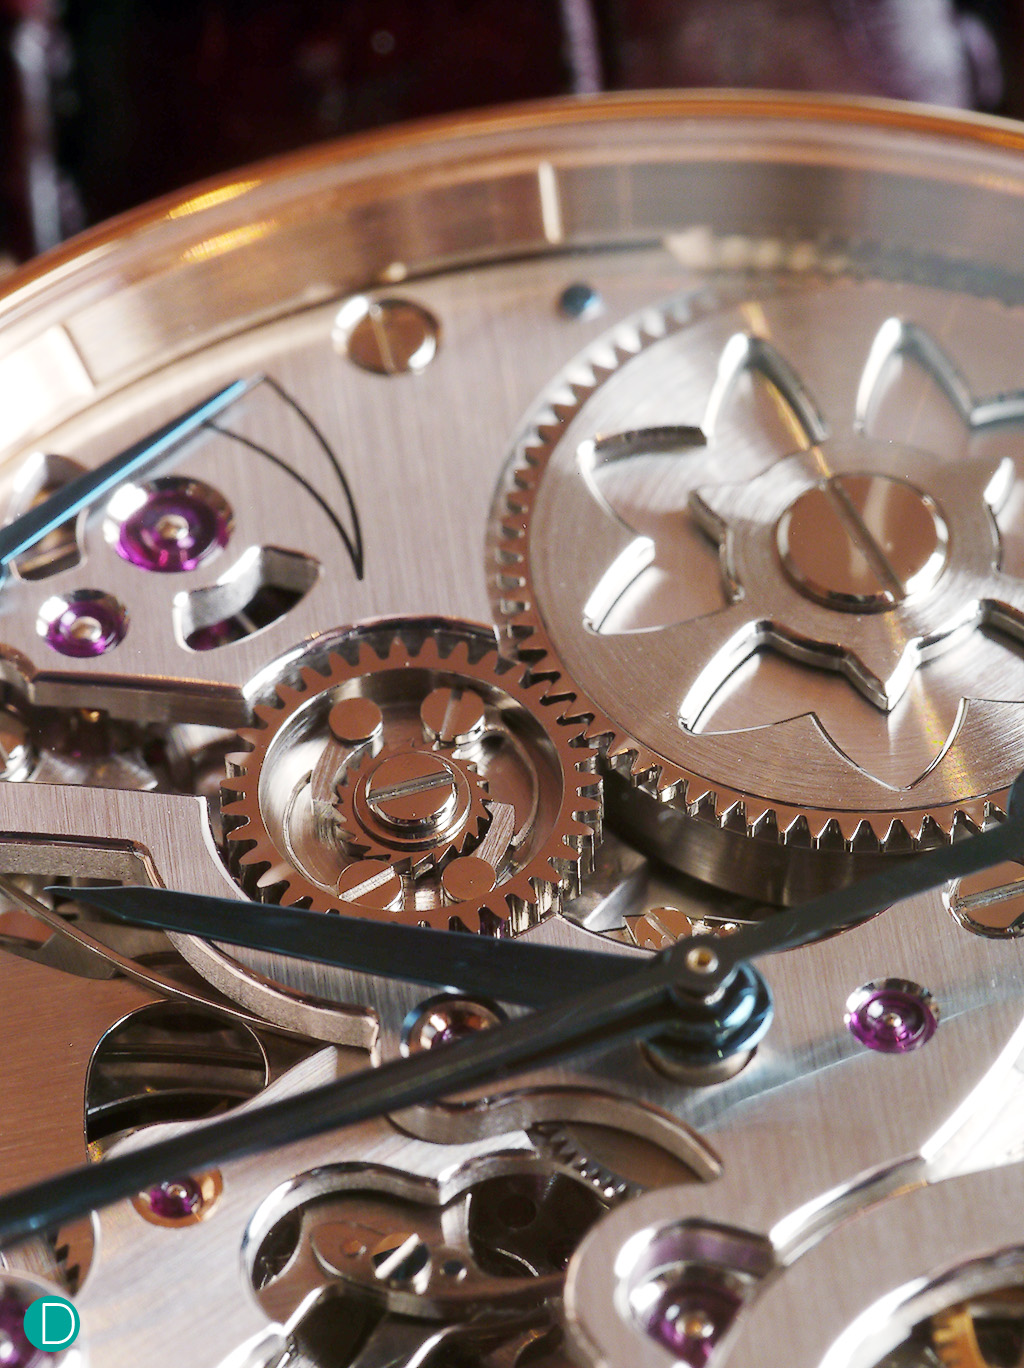 The dial side, showing the finishing and details.